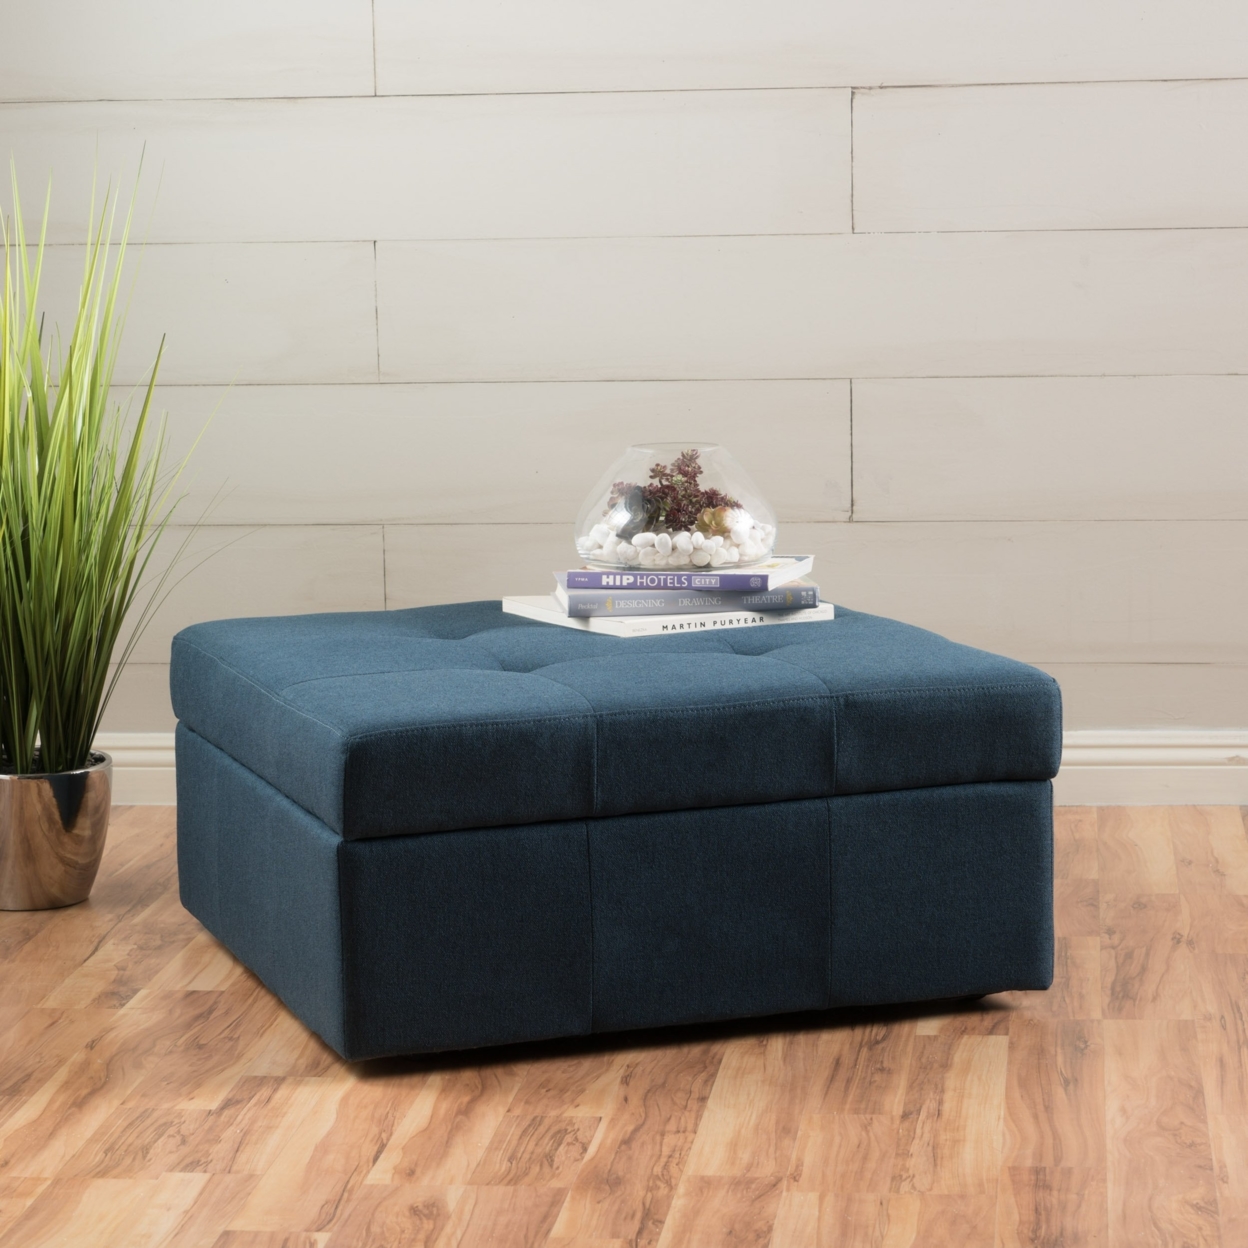 Channing Navy Blue Fabric Tufted Cover Storage Ottoman